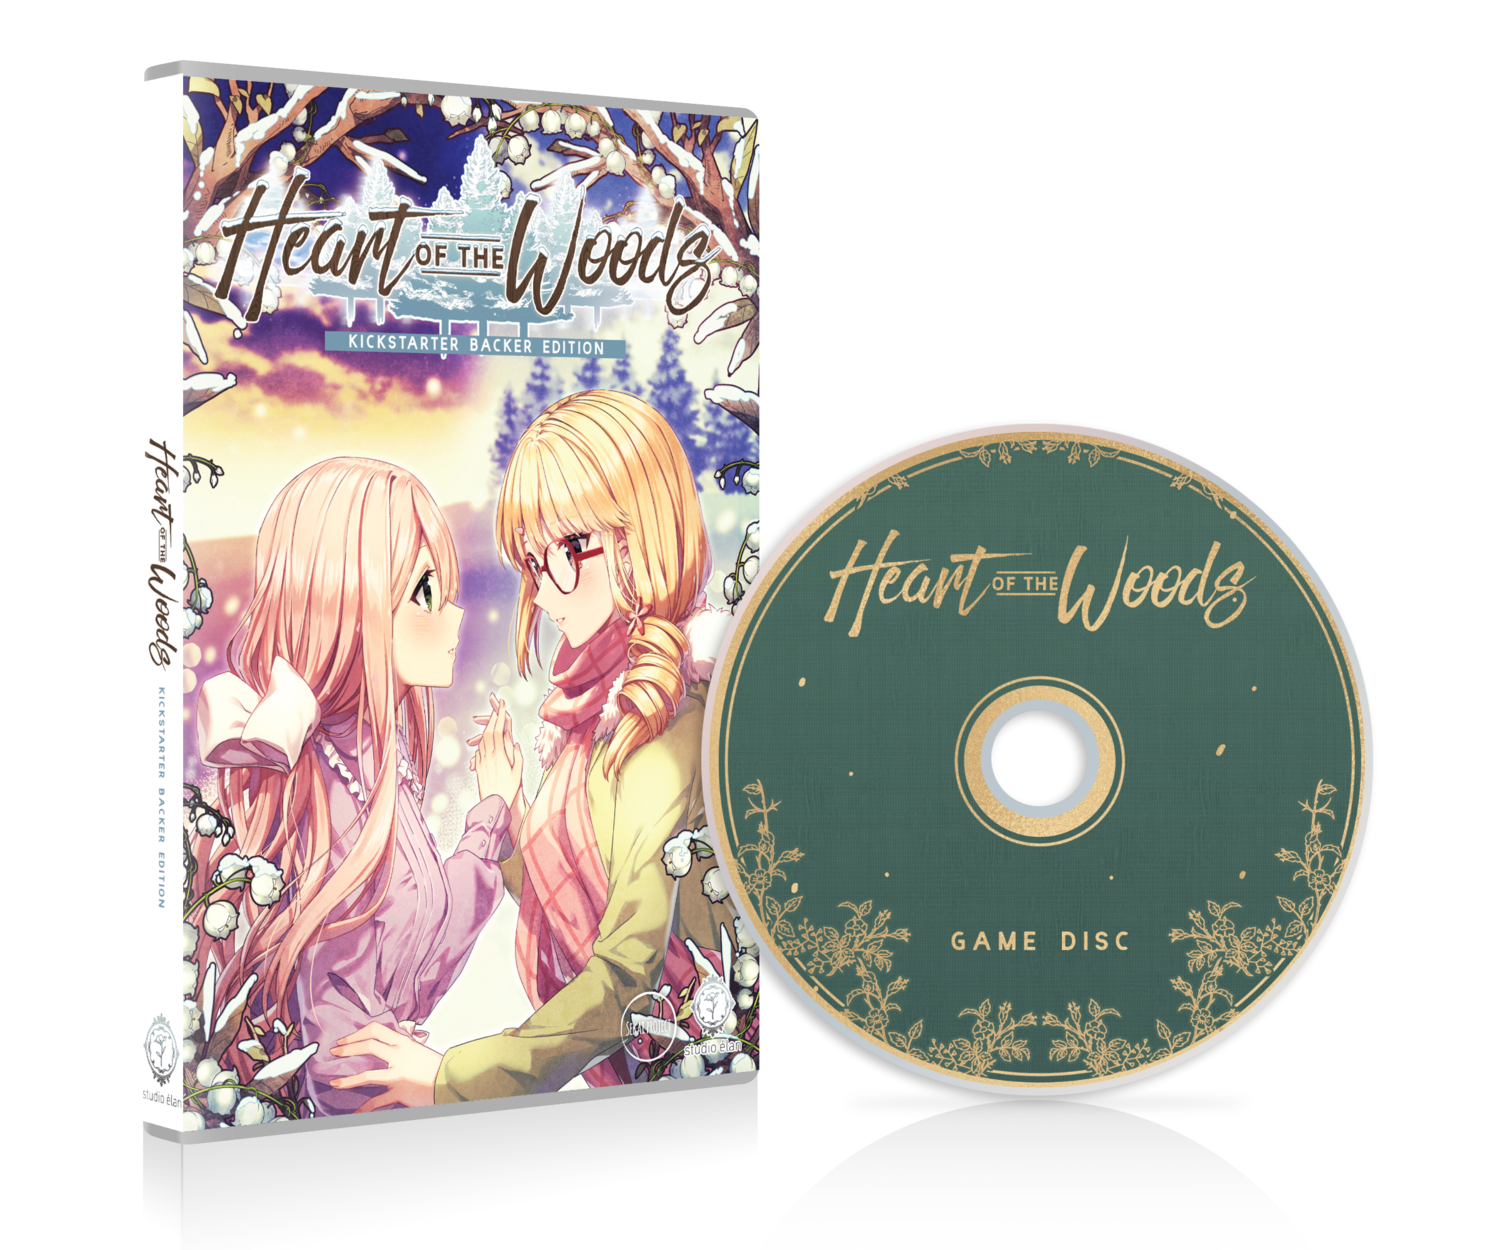 [Limited] Heart of the Woods Physical PC Game (Kickstarter Edition)